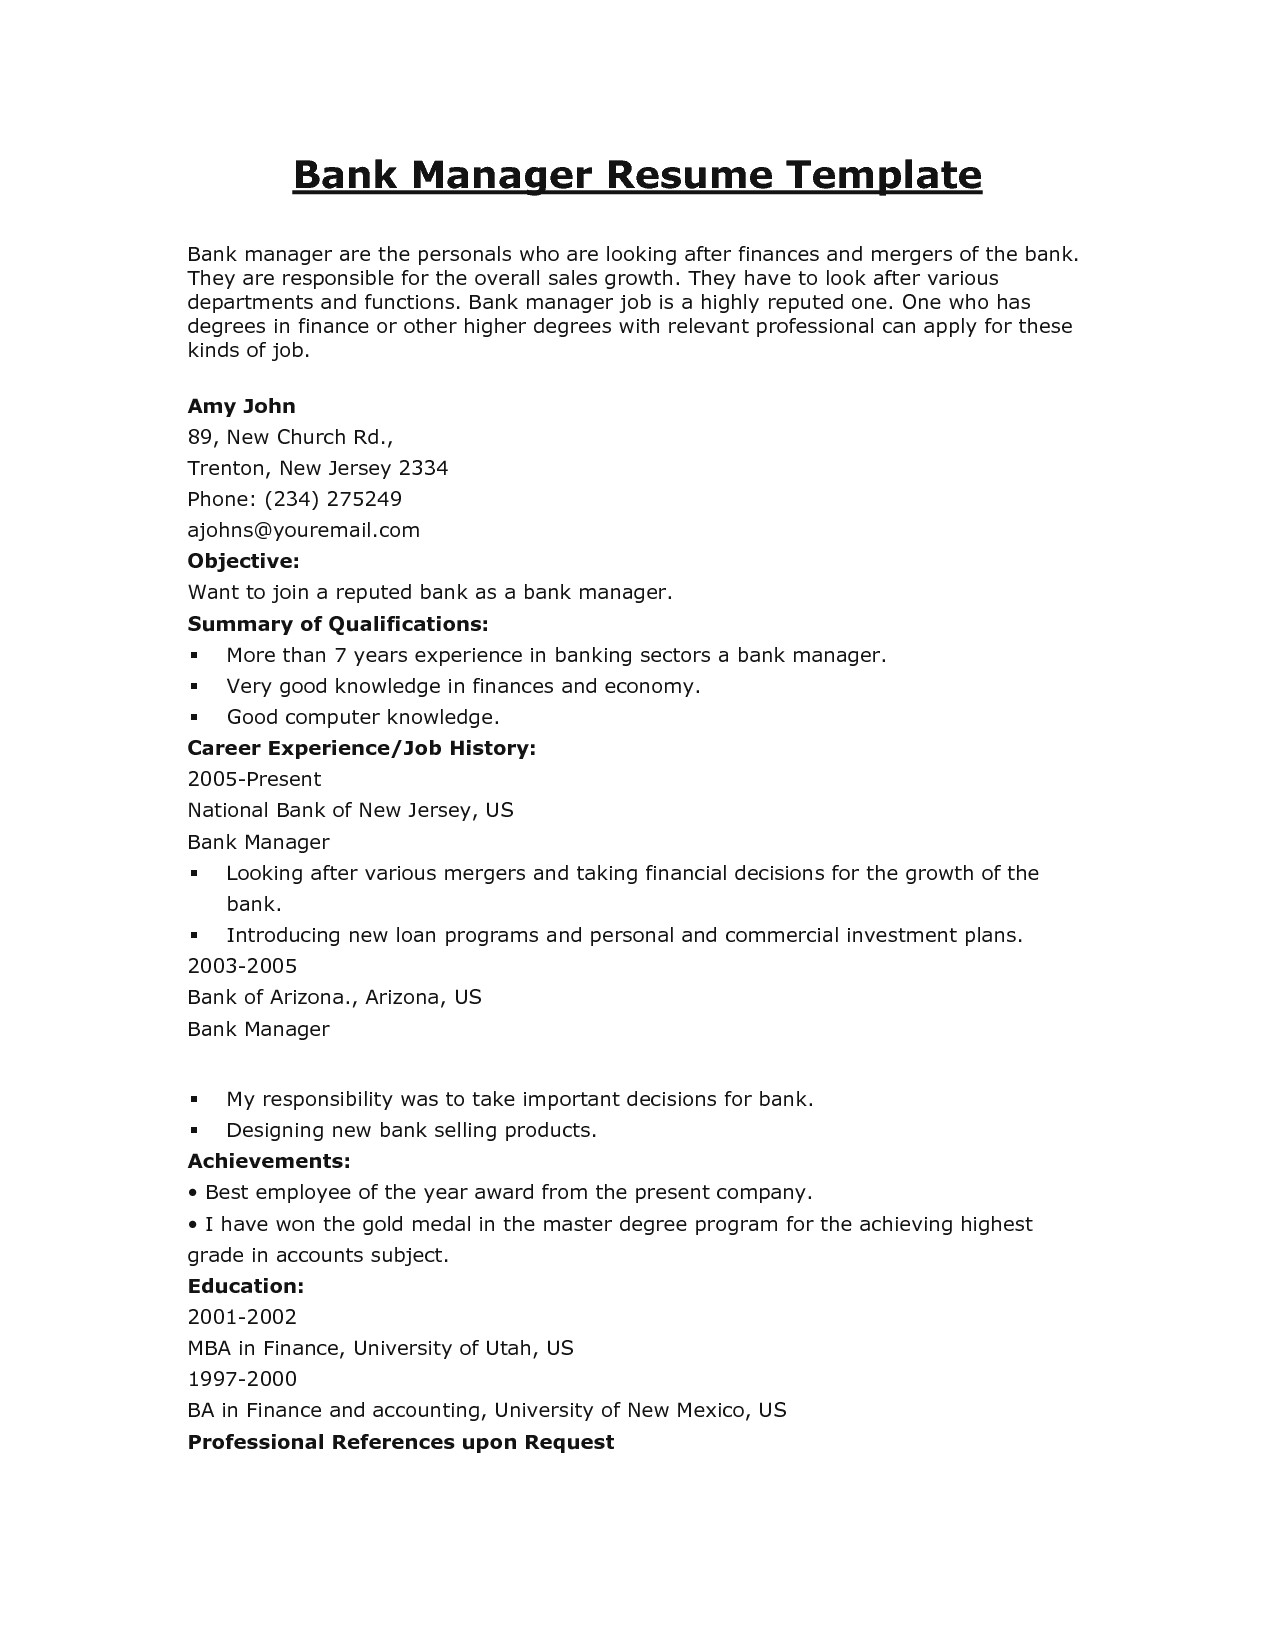 bank manager resume template